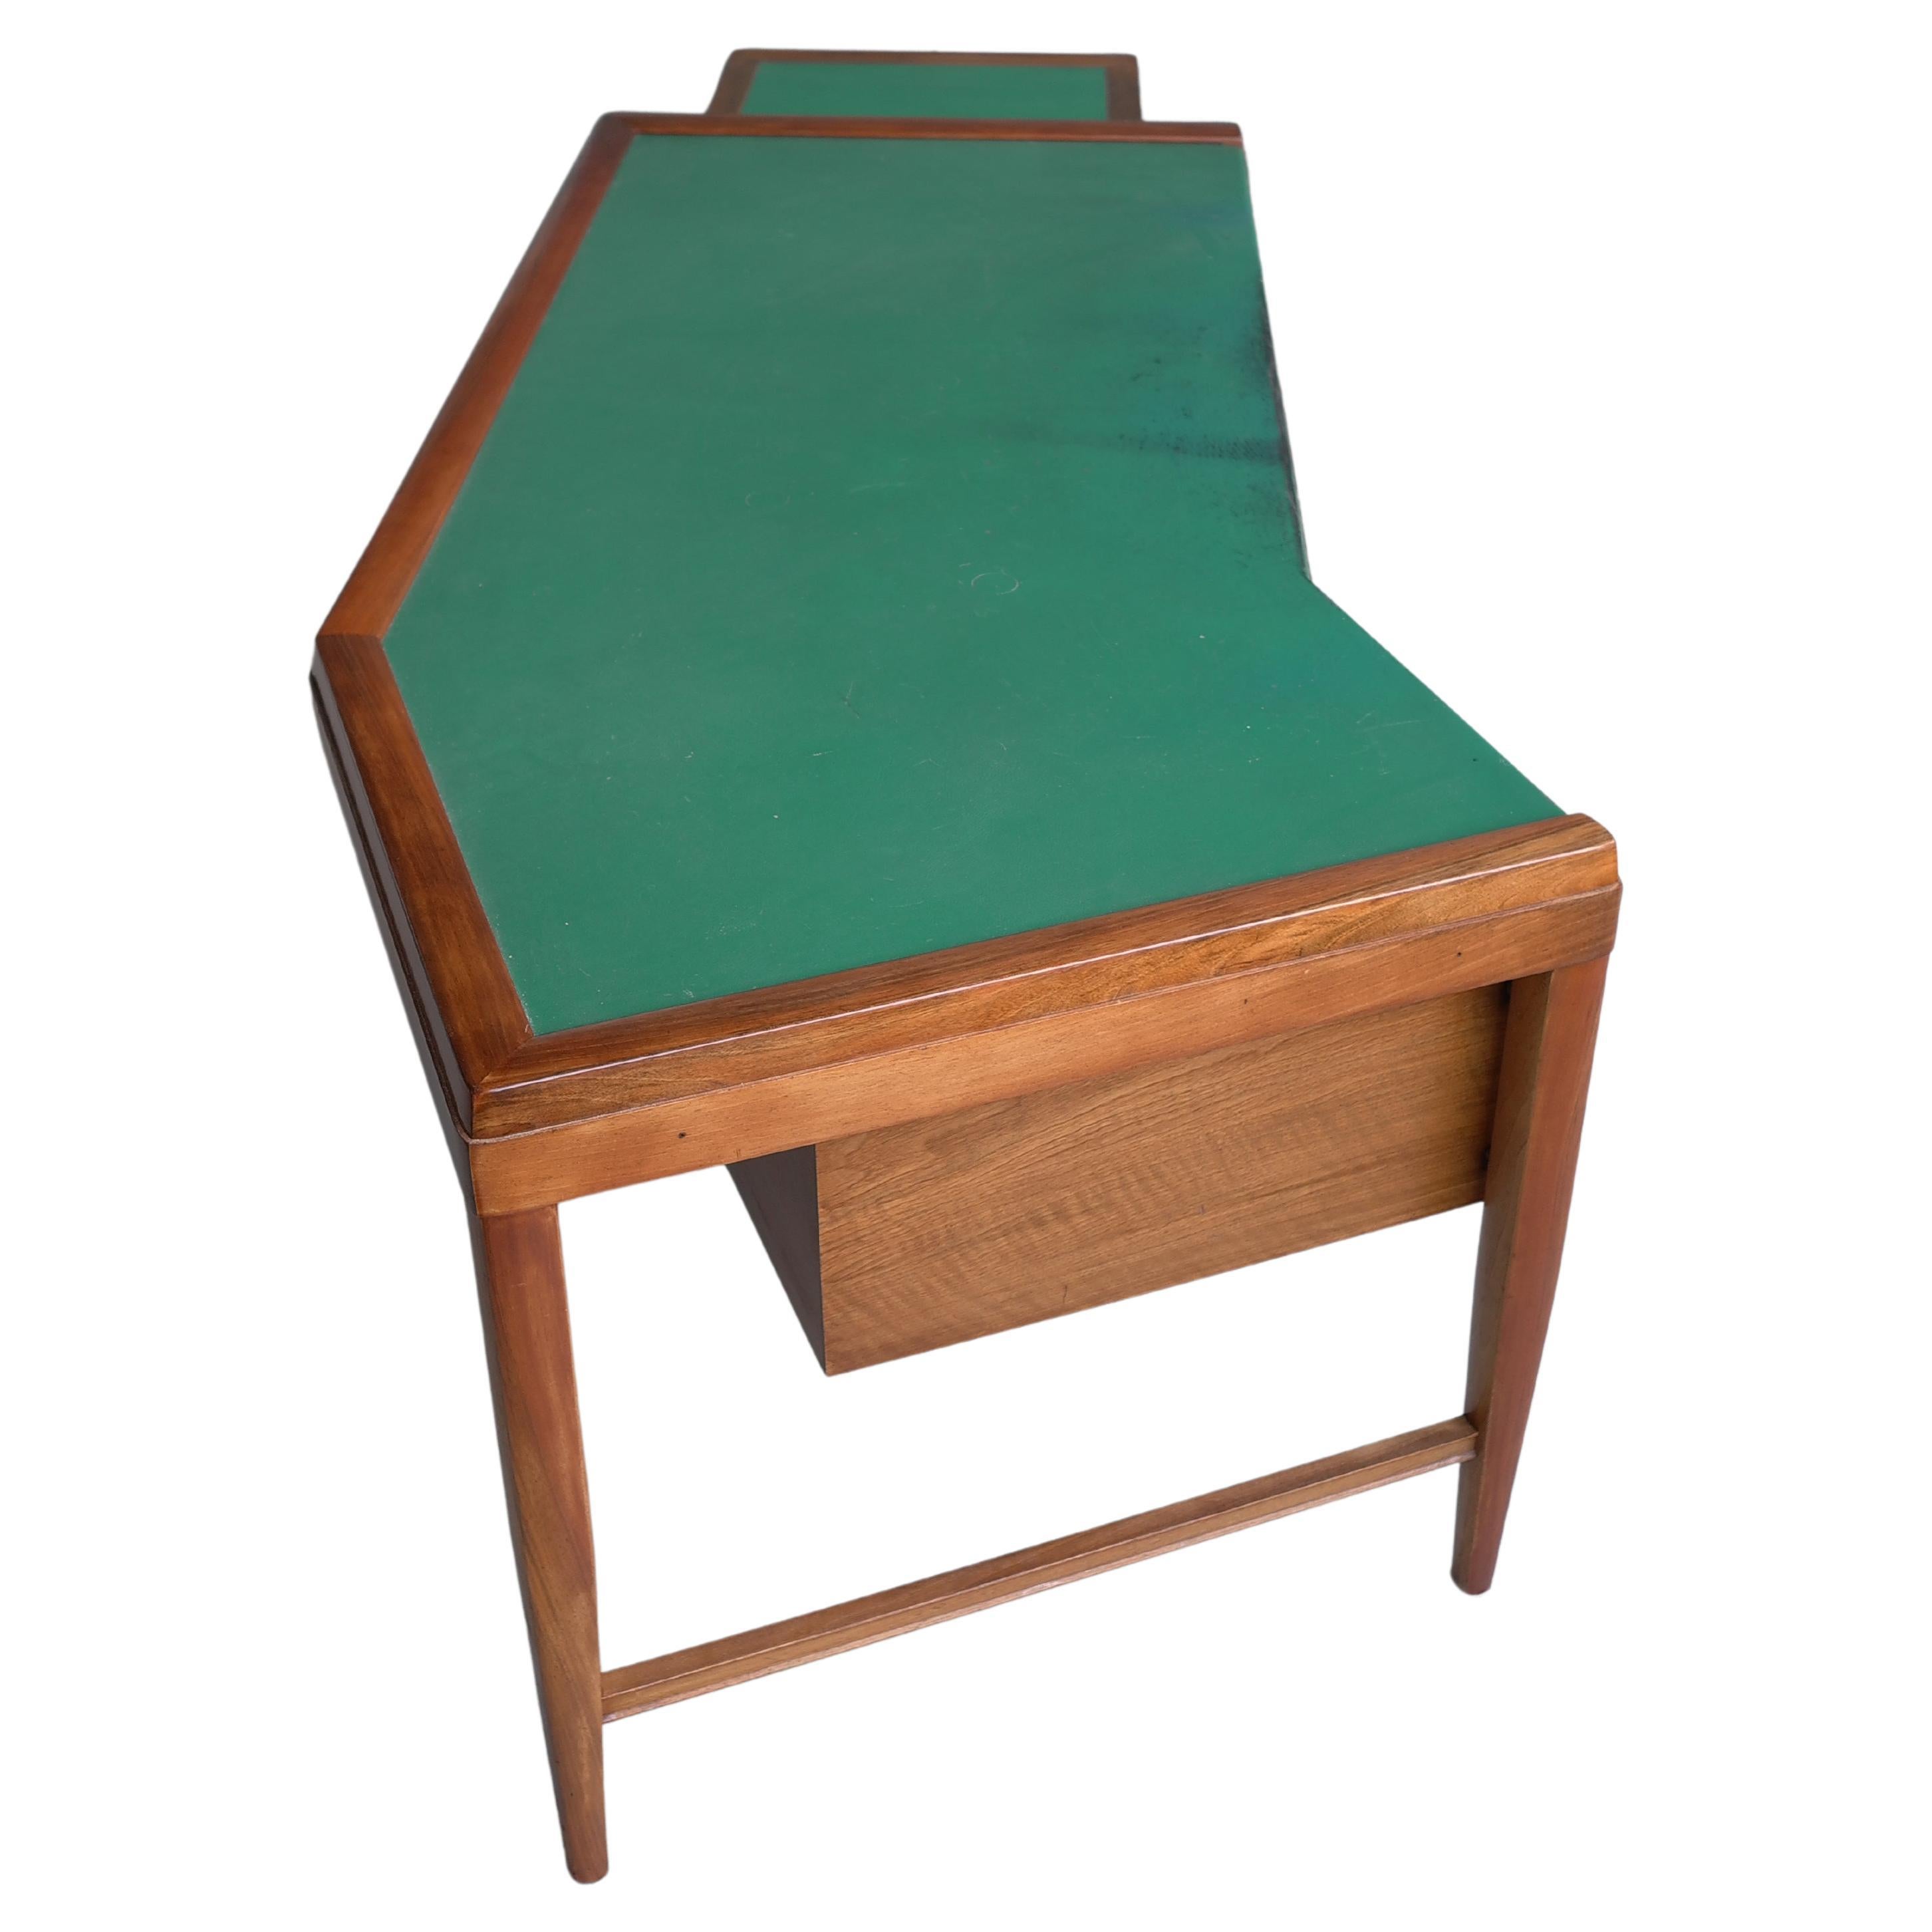 Italian Large Boomerang shaped Walnut Desk with Green Leather patinated top Italy 1950’s For Sale